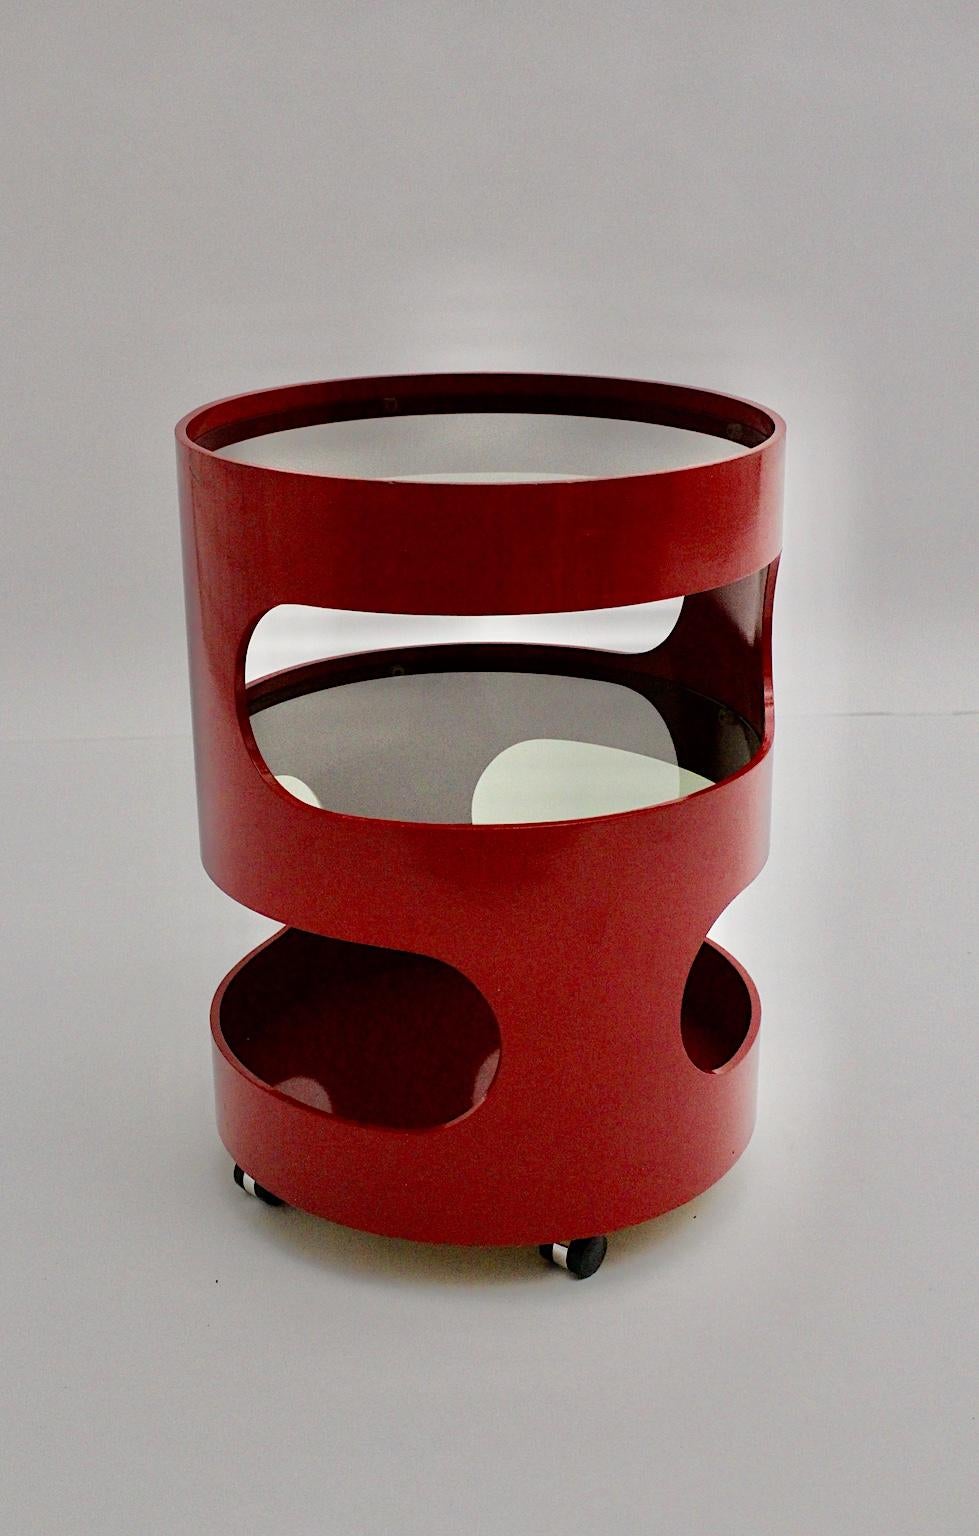 A round shaped two-tiered red vintage side table made of dark red lacquered plywood, which shows 2 round glass plates and 4 wheels.
The vintage condition is very good with signs of age.
Approximate measures:
Diameter 45 cm
Height 62 cm.